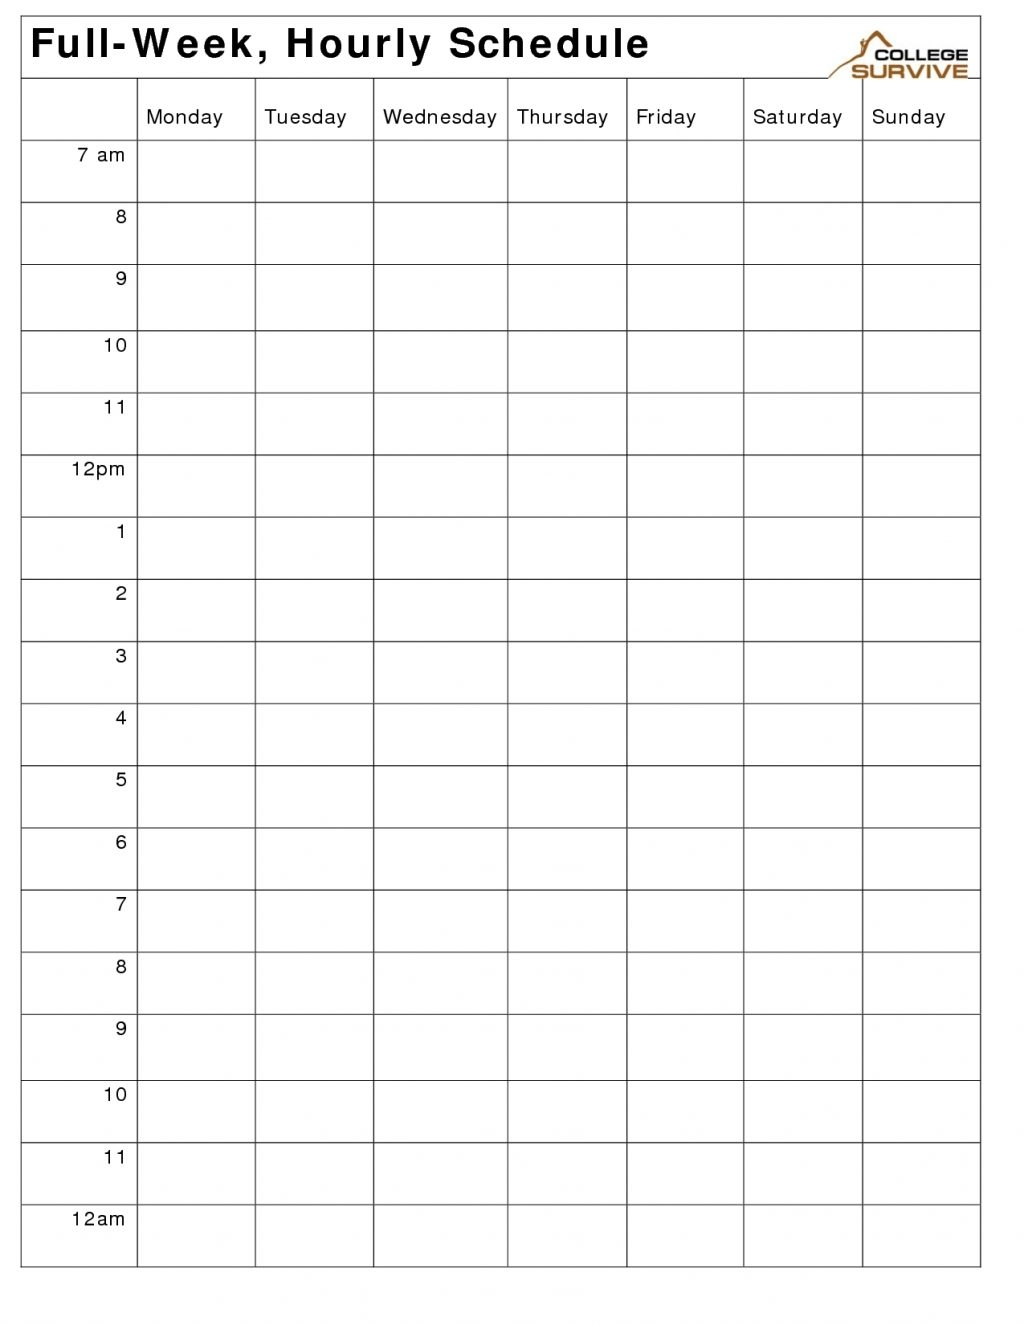 Generic Weekly Calendar With Time Slots  Calendar inside Weekly Calendar With Time